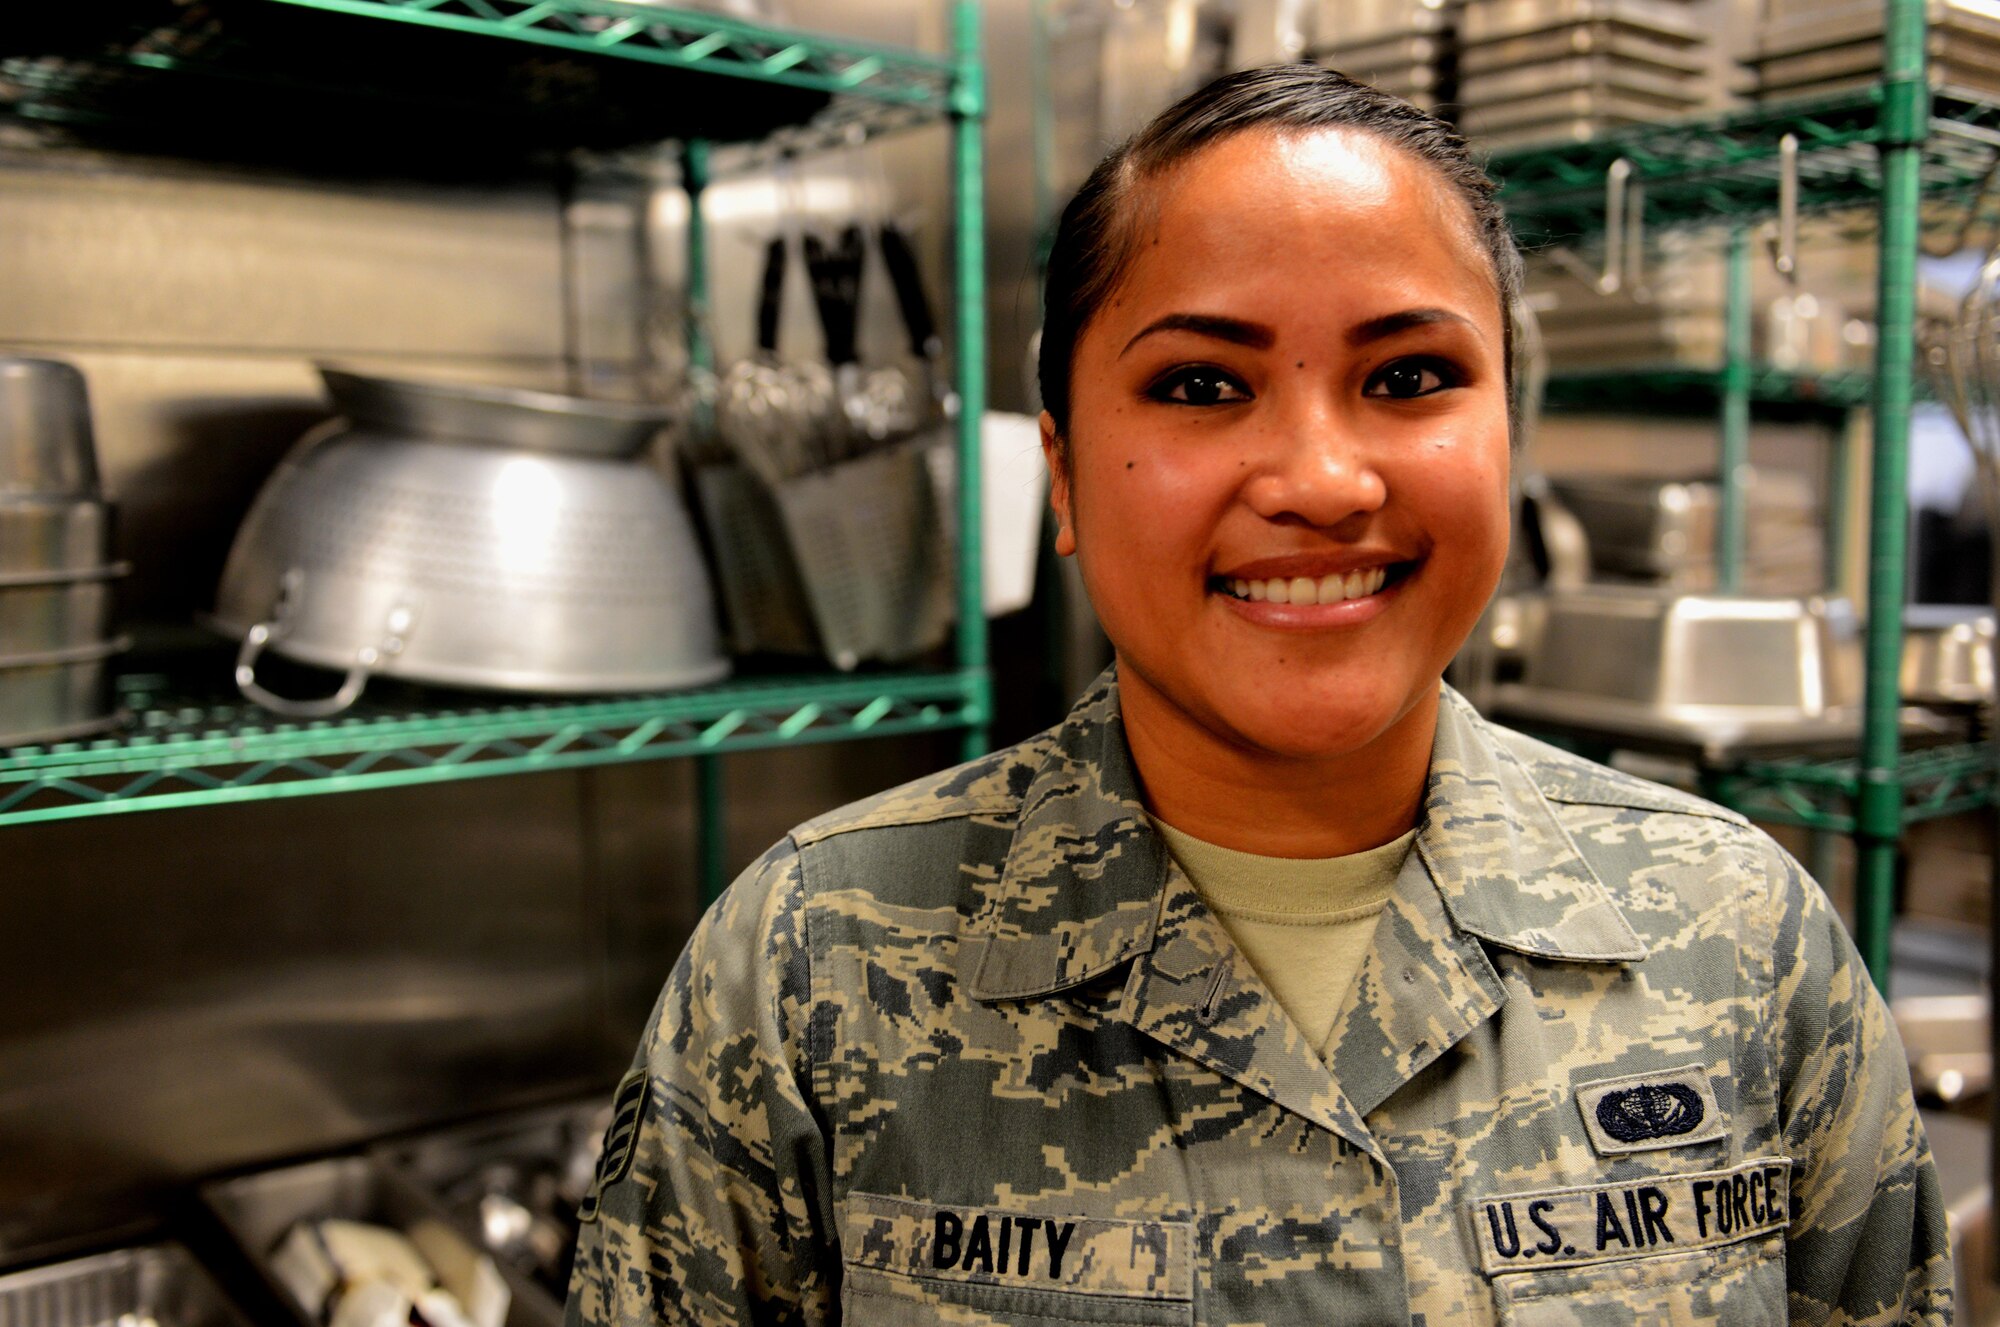 Staff Sgt. Tamra Baity, 9th Force Support Squadron storeroom non-commissioned officer in charge, poses for a photo, March 8, 2017. (U.S. Air Force photo/Staff Sgt. Jeffrey Schultze)